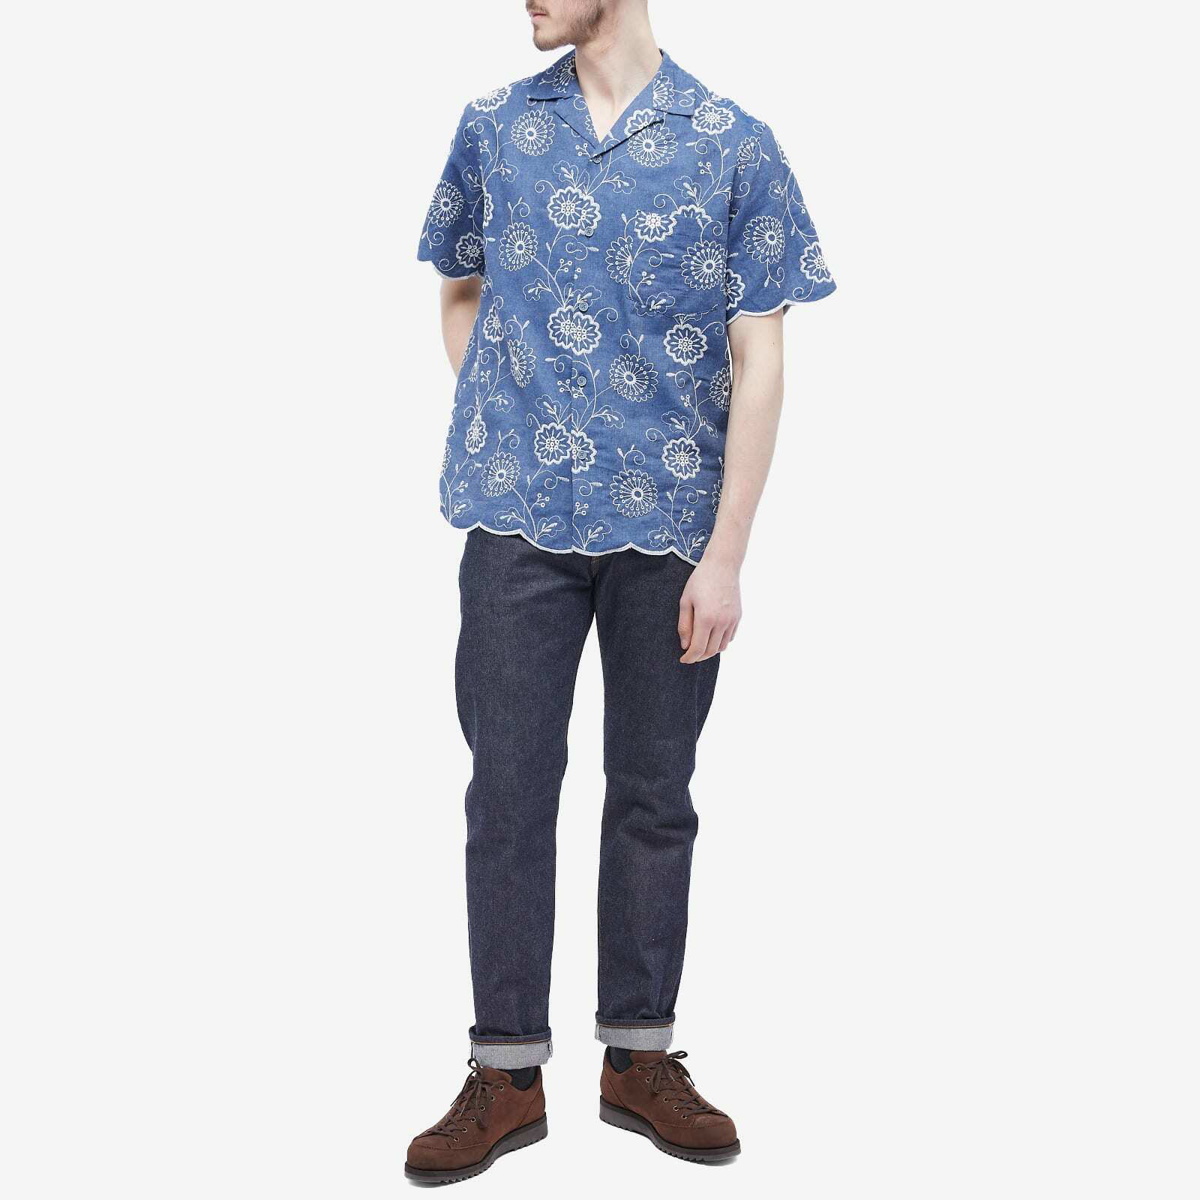 Men's Embroidered Denim 1 Shirt by Portuguese Flannel